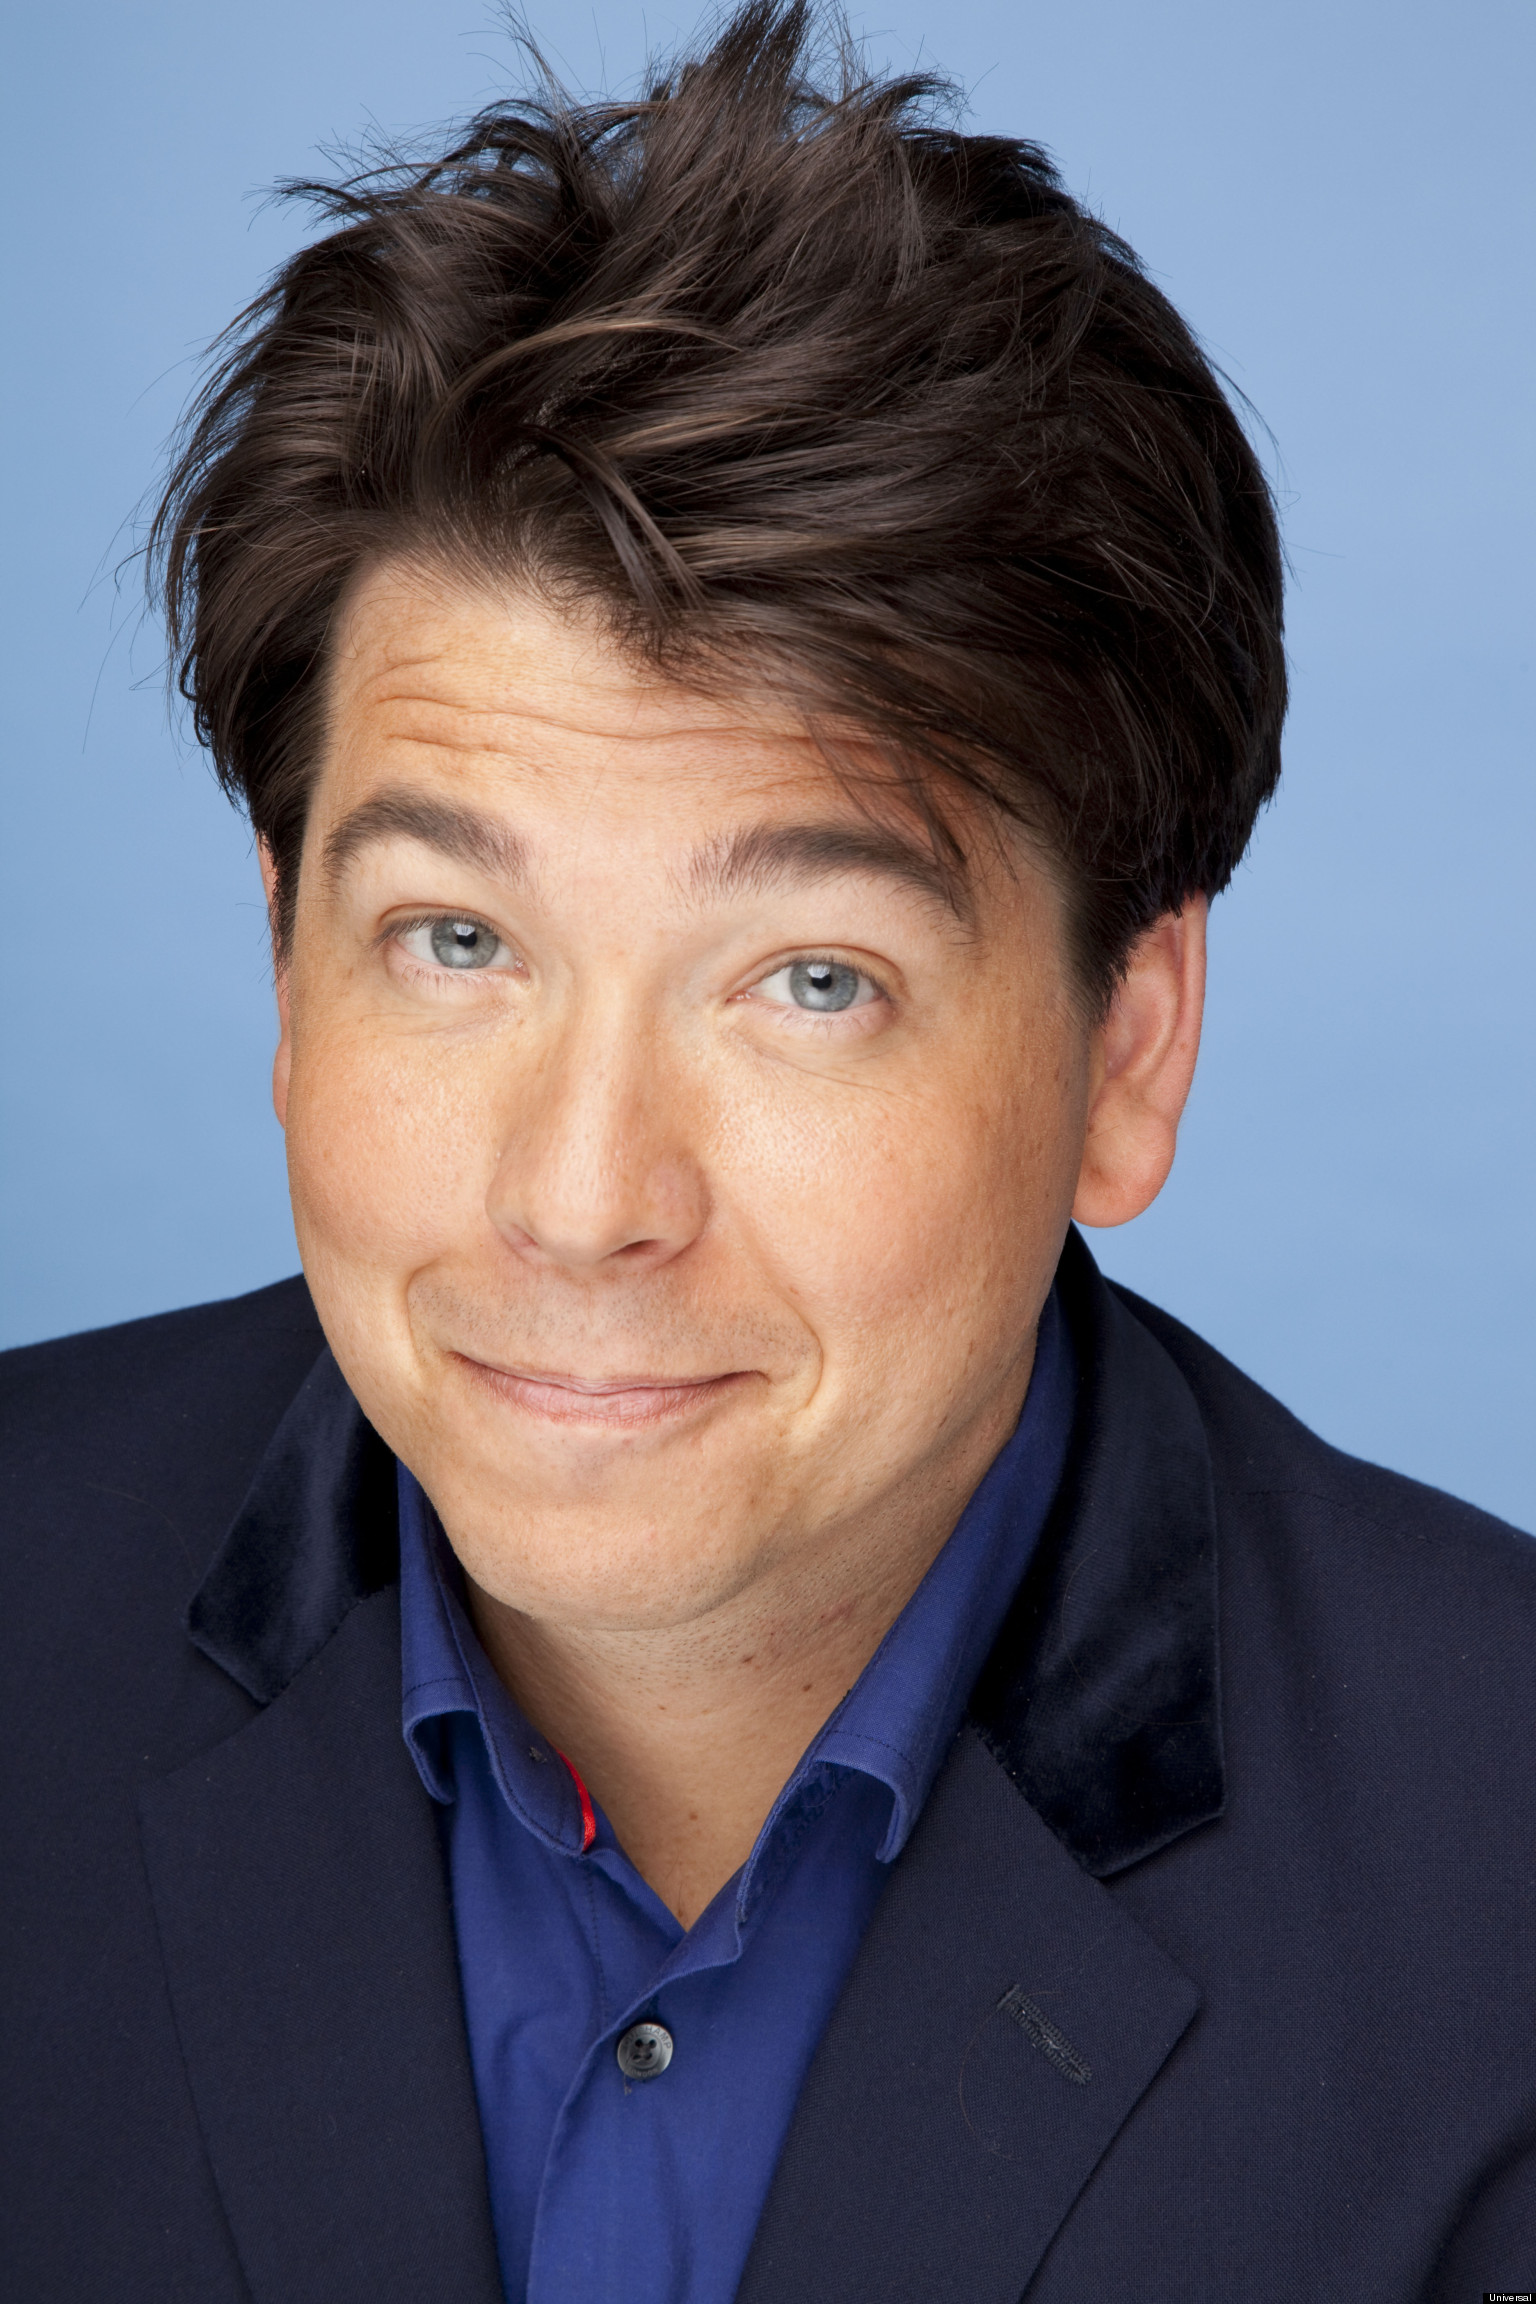 EXCLUSIVE CLIP: Michael McIntyre - Master Of The Absurd Observation